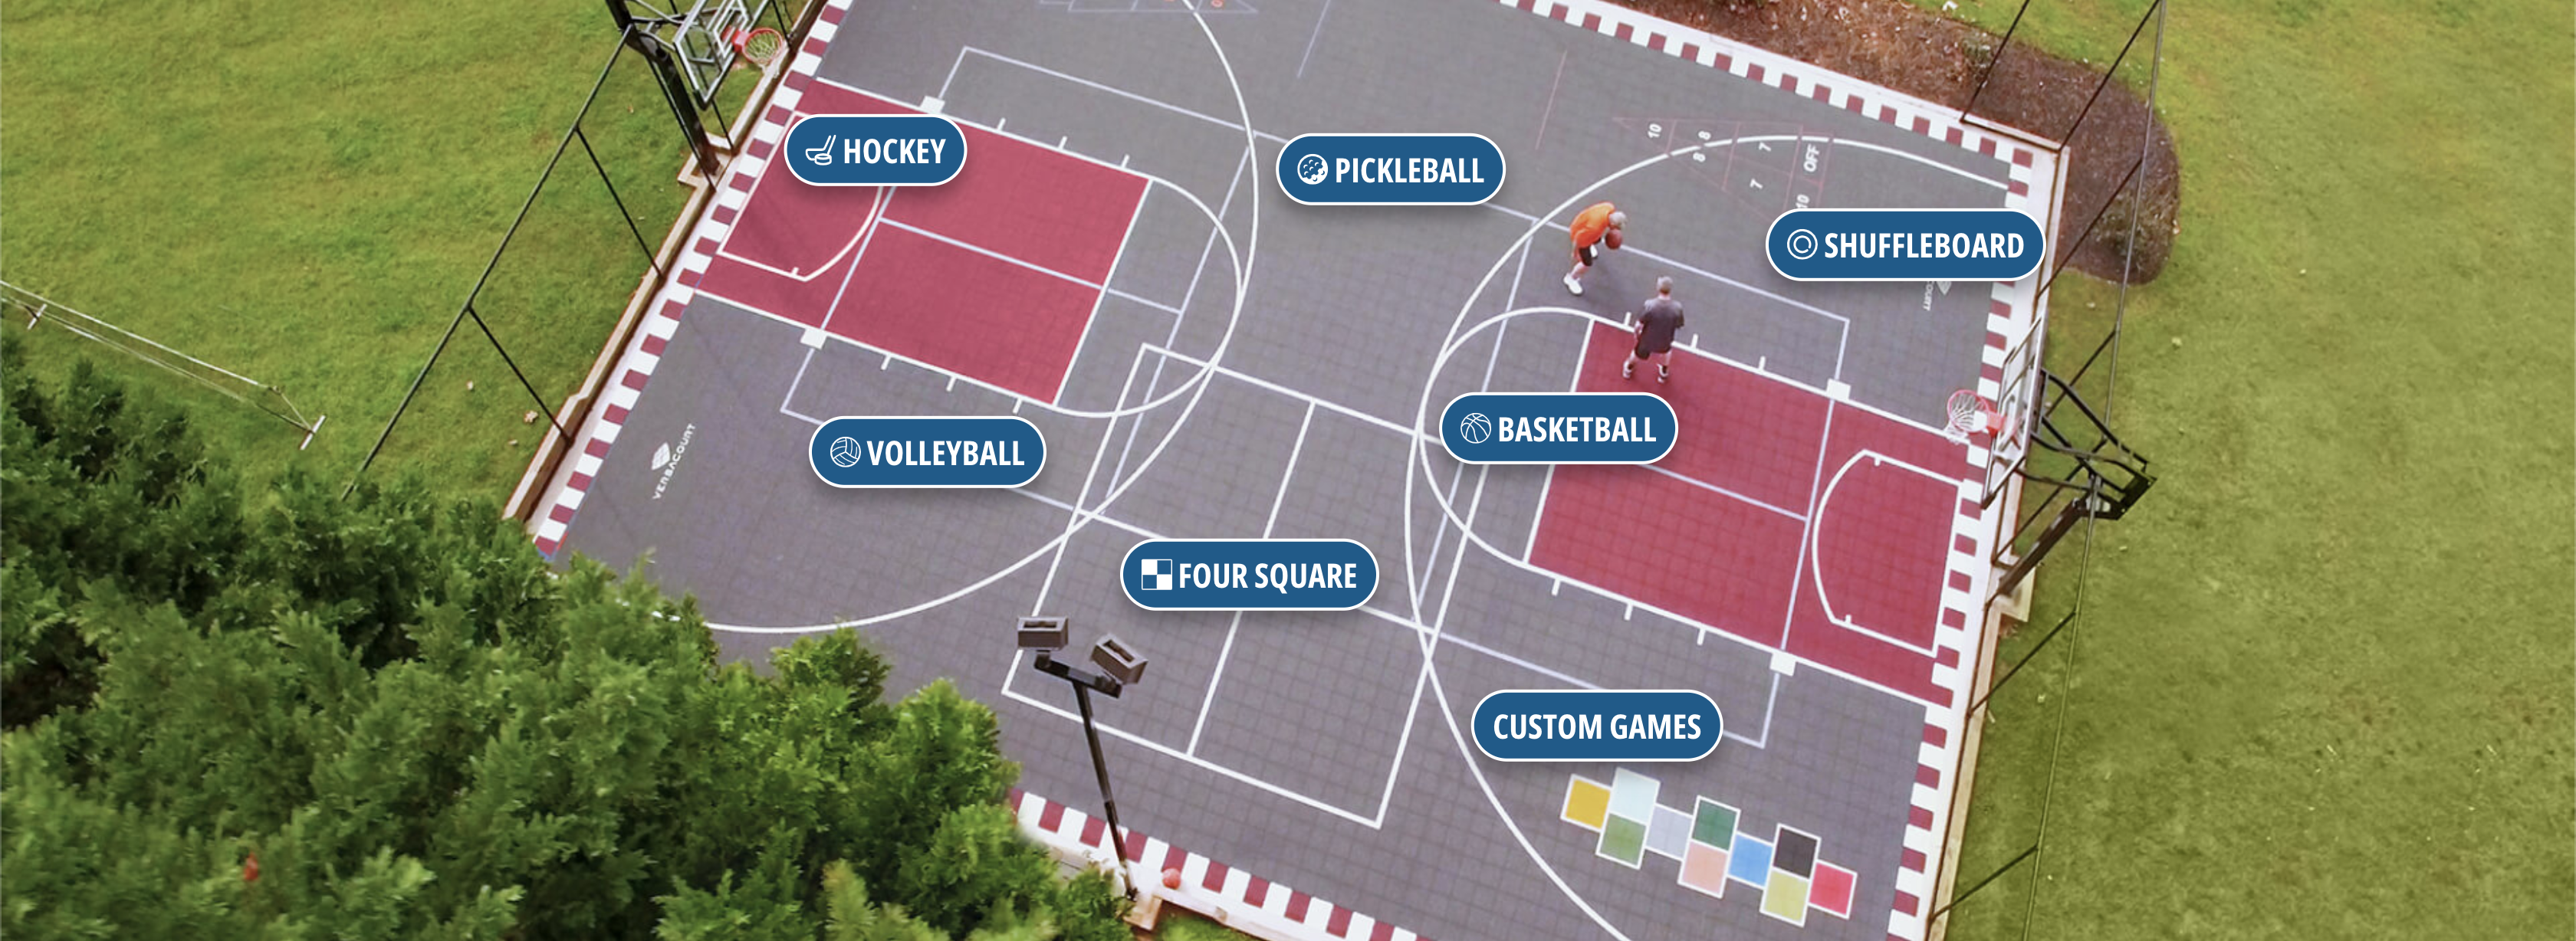 versacourt aerial view with different sports labeled on the court